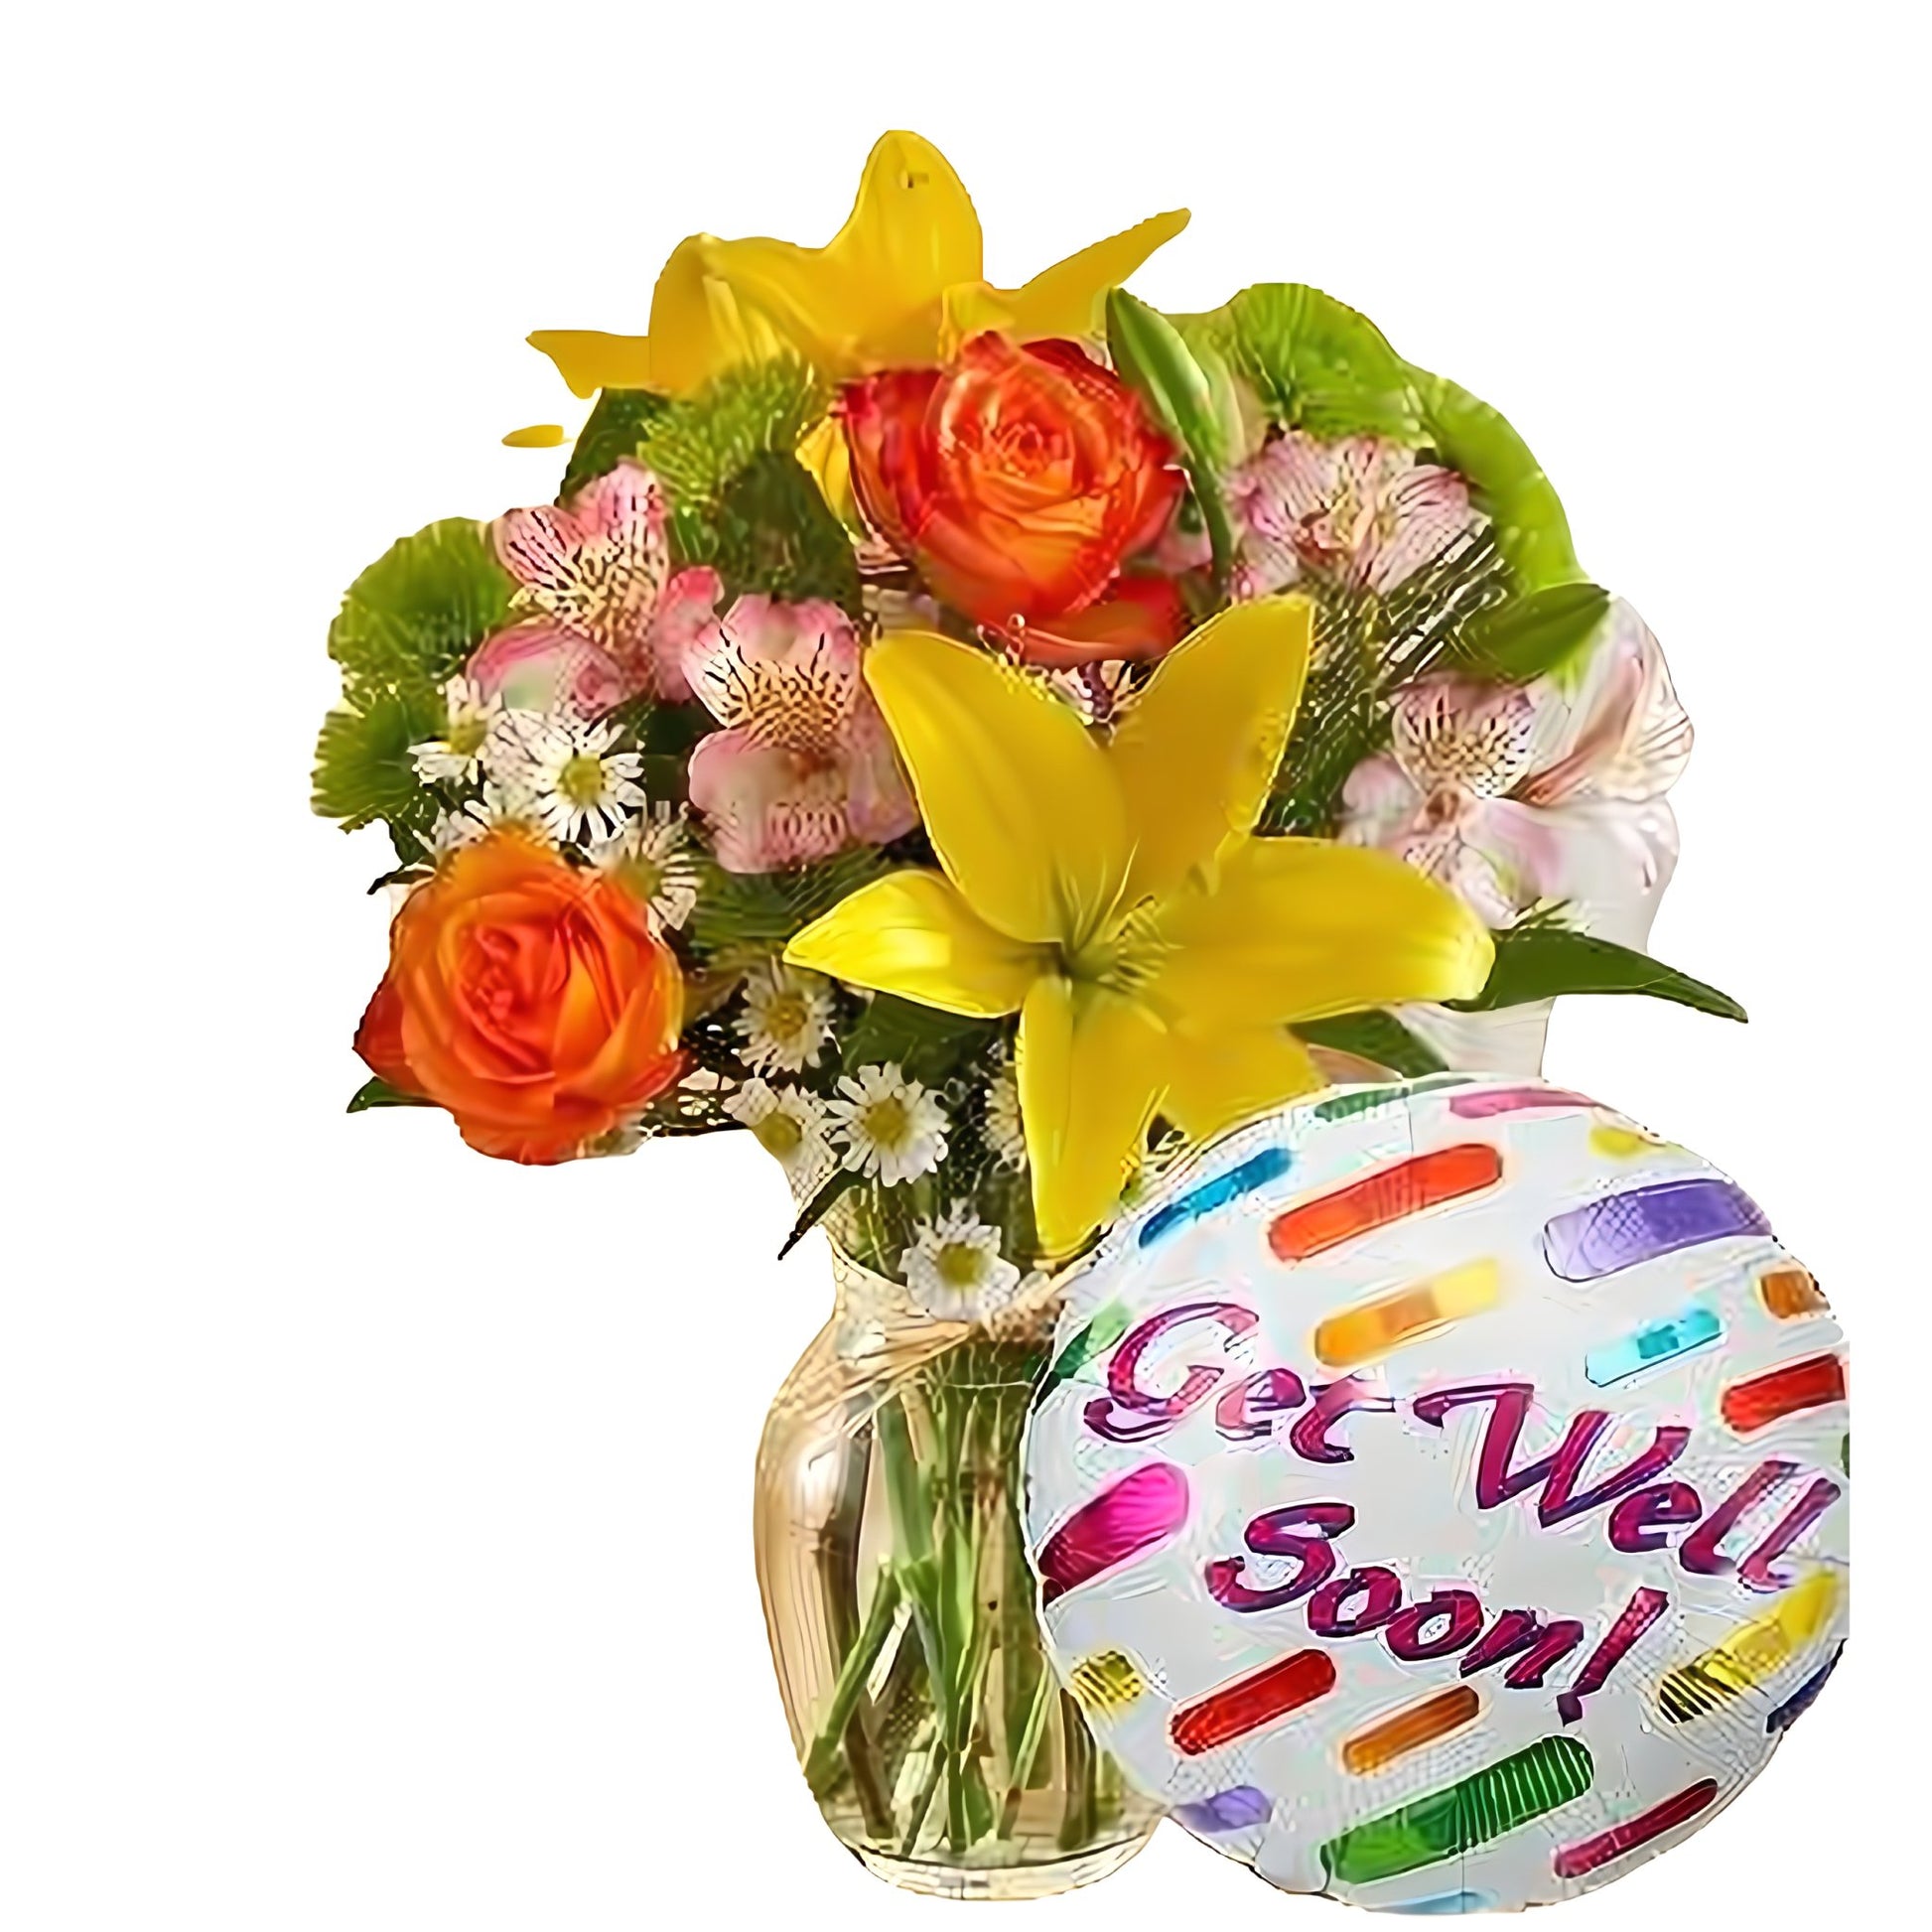 Fields of the World w/ Get Well Balloon - Floral Arrangement - Flower Delivery Brooklyn